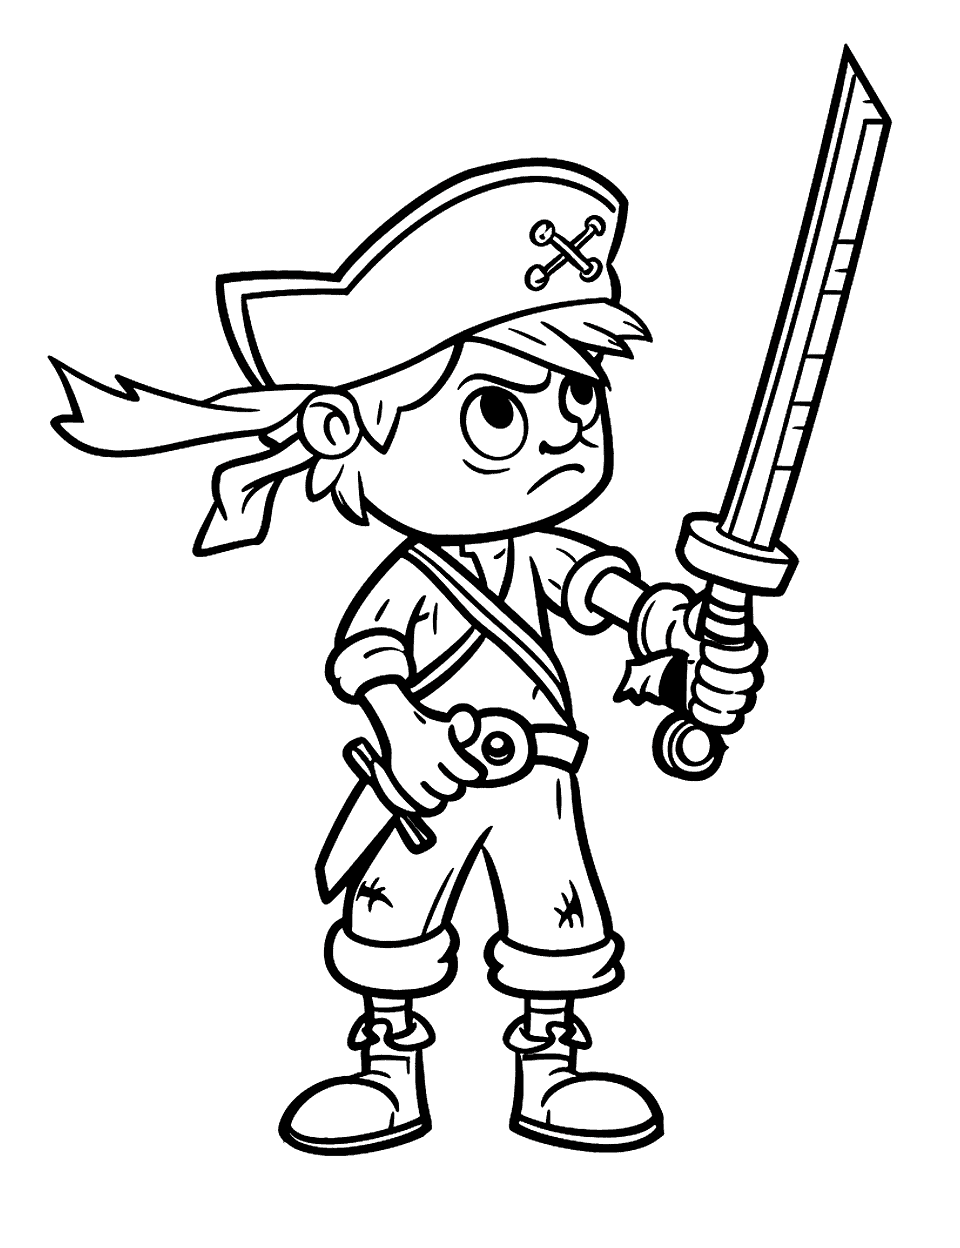 Boy Pirate’s Sword Practice Pirate Coloring Page - A boy pirate practicing with a wooden sword.